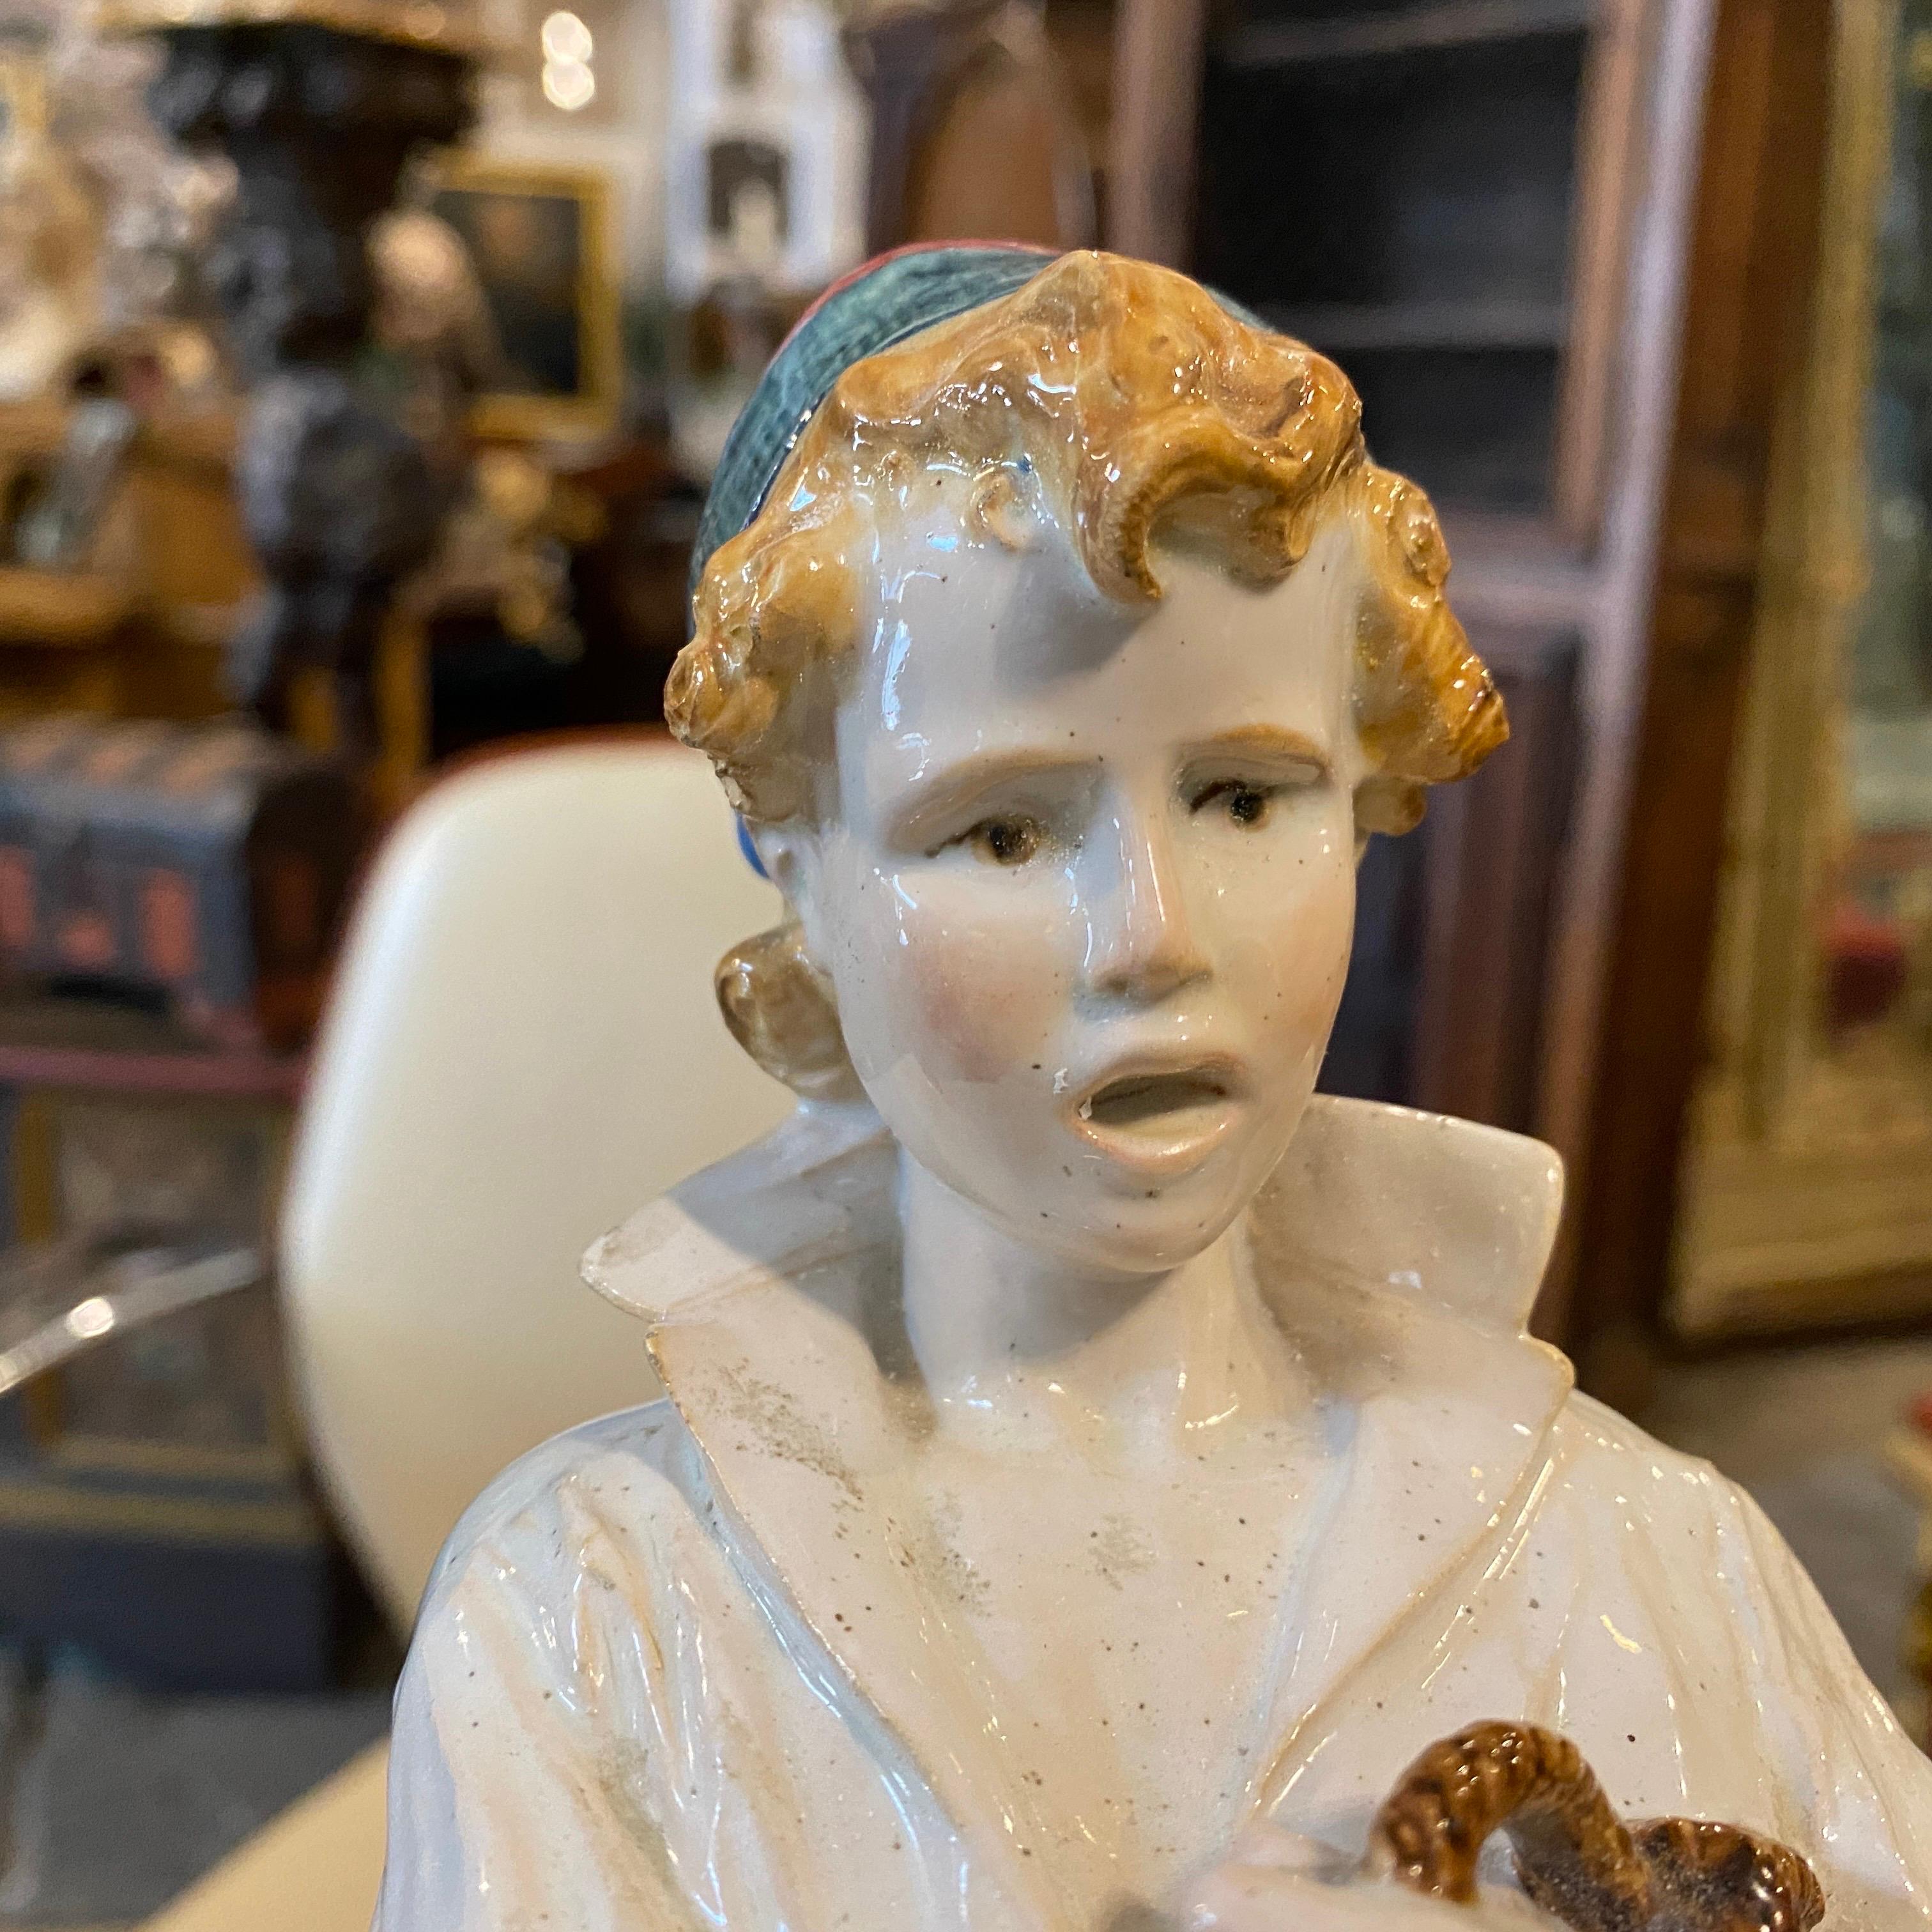 Pair of Majolica statue in the shape of a boy and a woman with basket designed by Urbano Lucchesi for Ginori Doccia factory (Florence), around 1888-1889. Majolica decorated with polychrome enamels under the showcase. They are in good condition